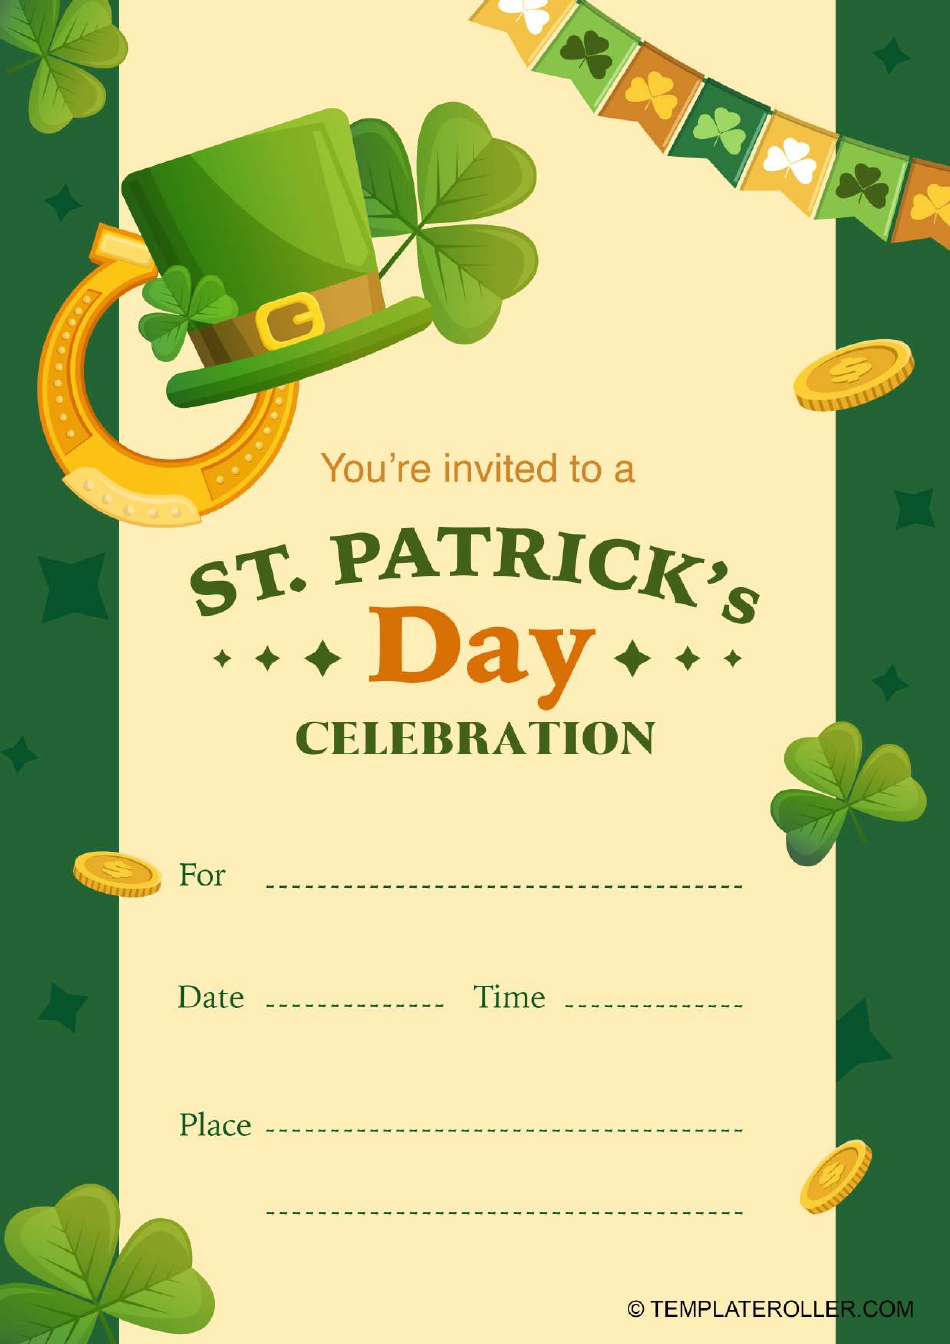 st-patrick-s-day-invitation-template-luck-download-printable-pdf